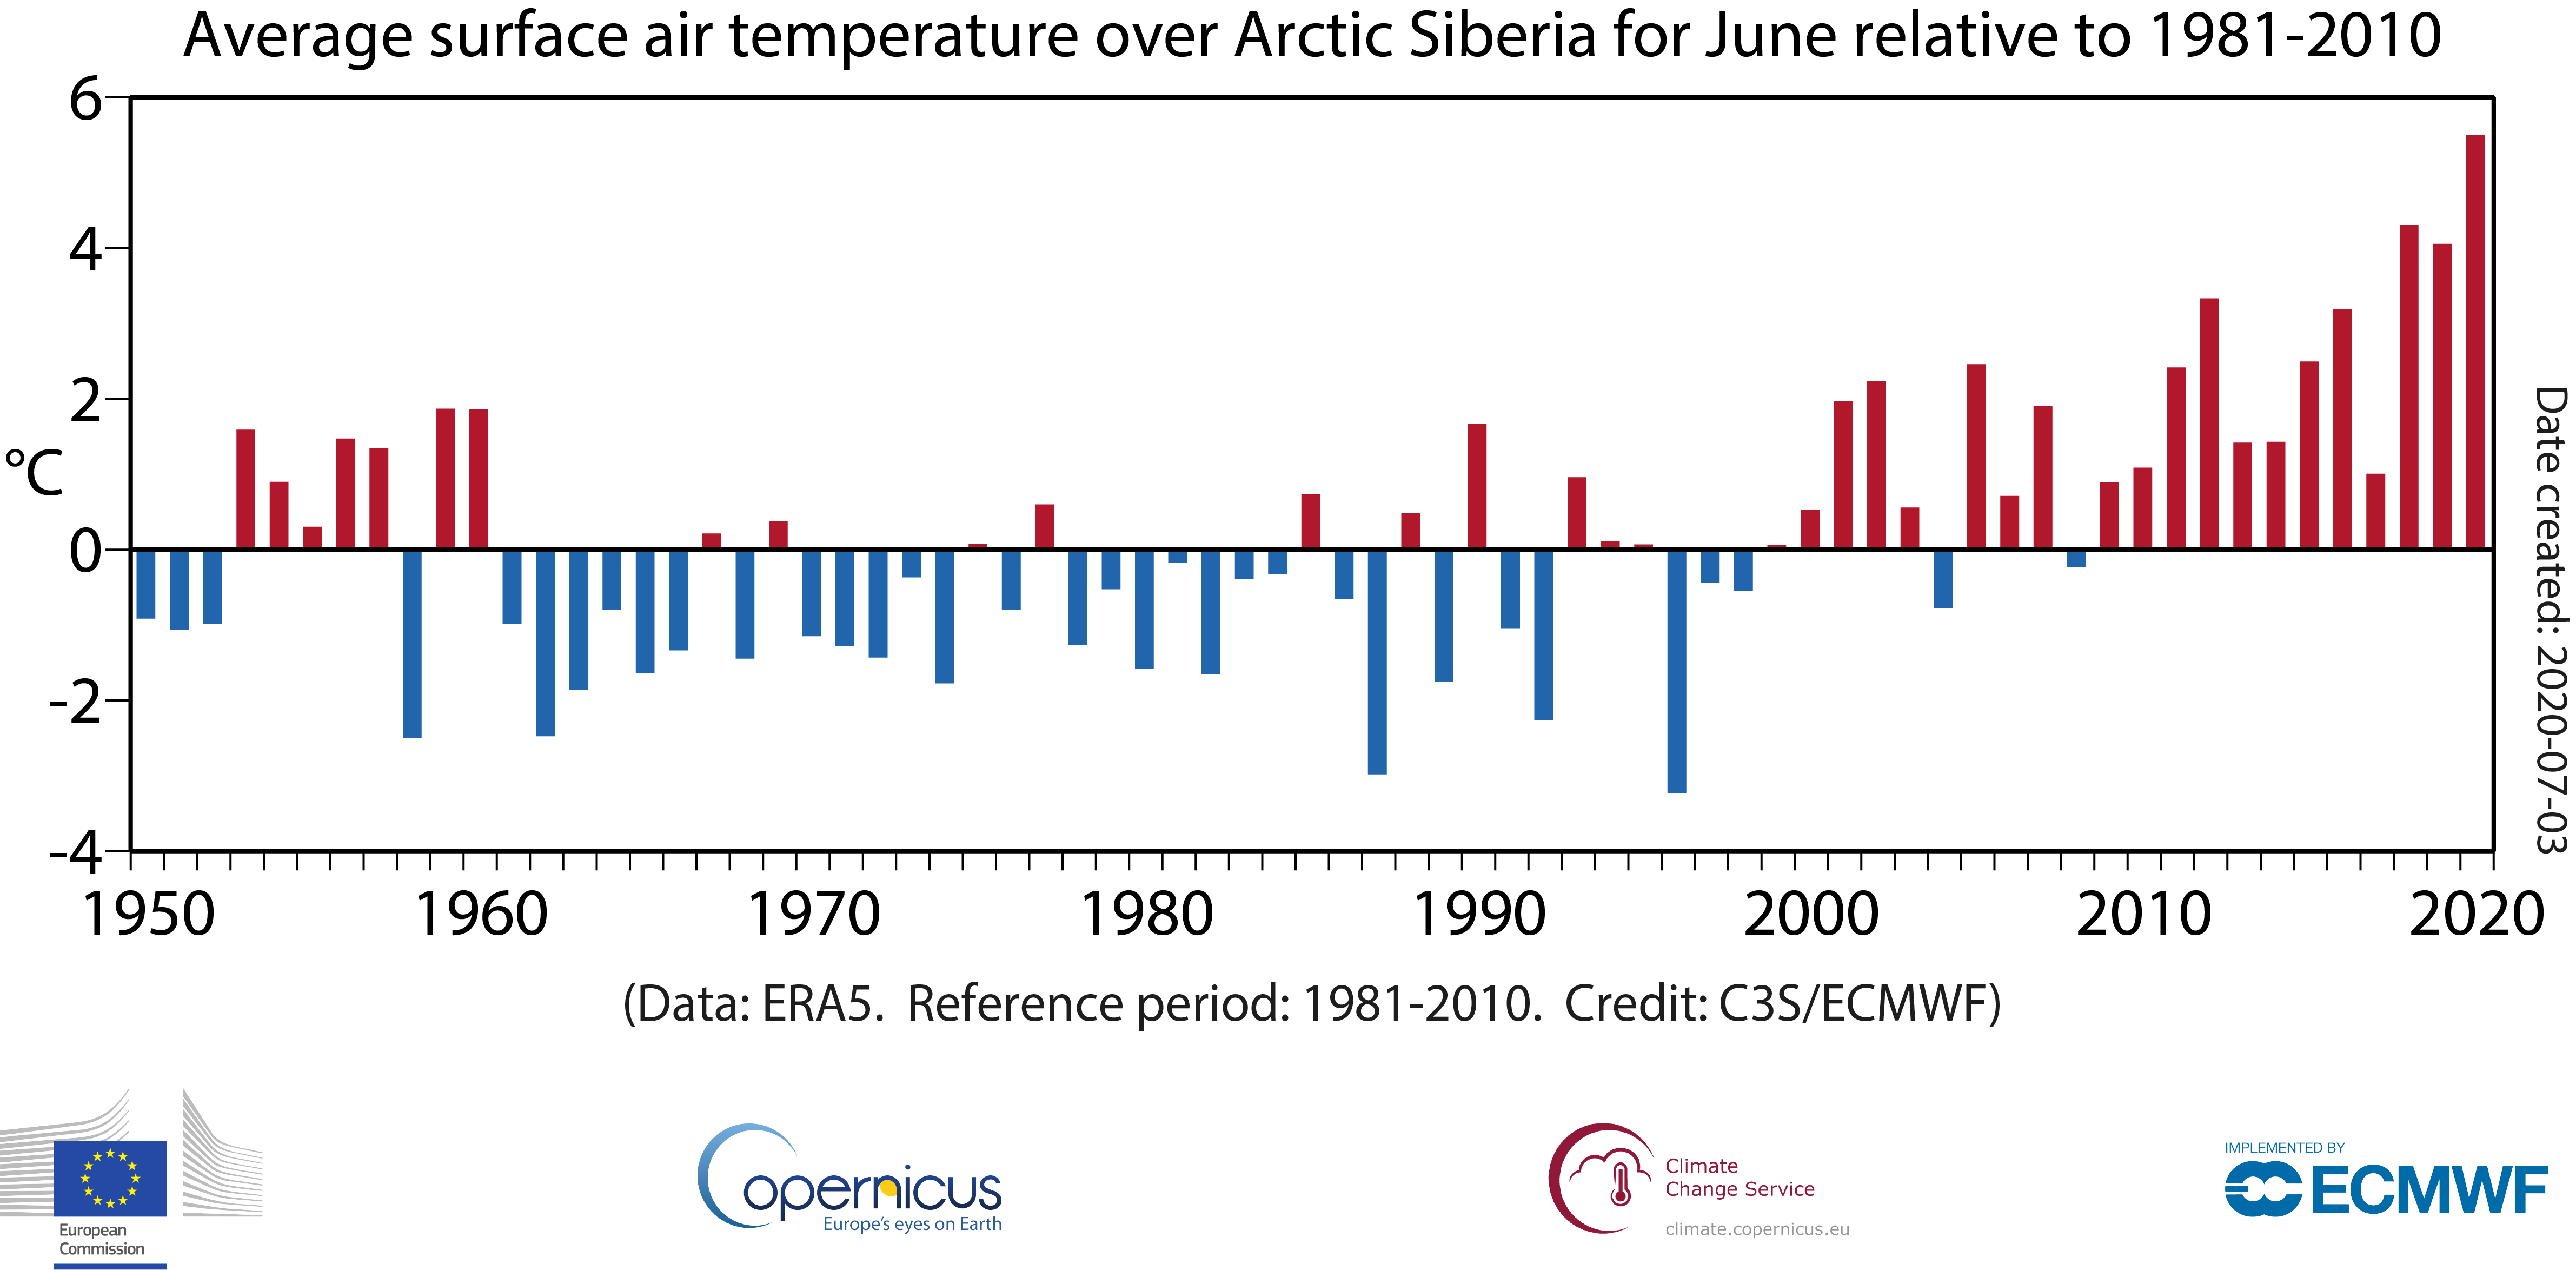 Average surface air temperature in June over Arctic Siberia shown as an anomaly relative to 1981-2010